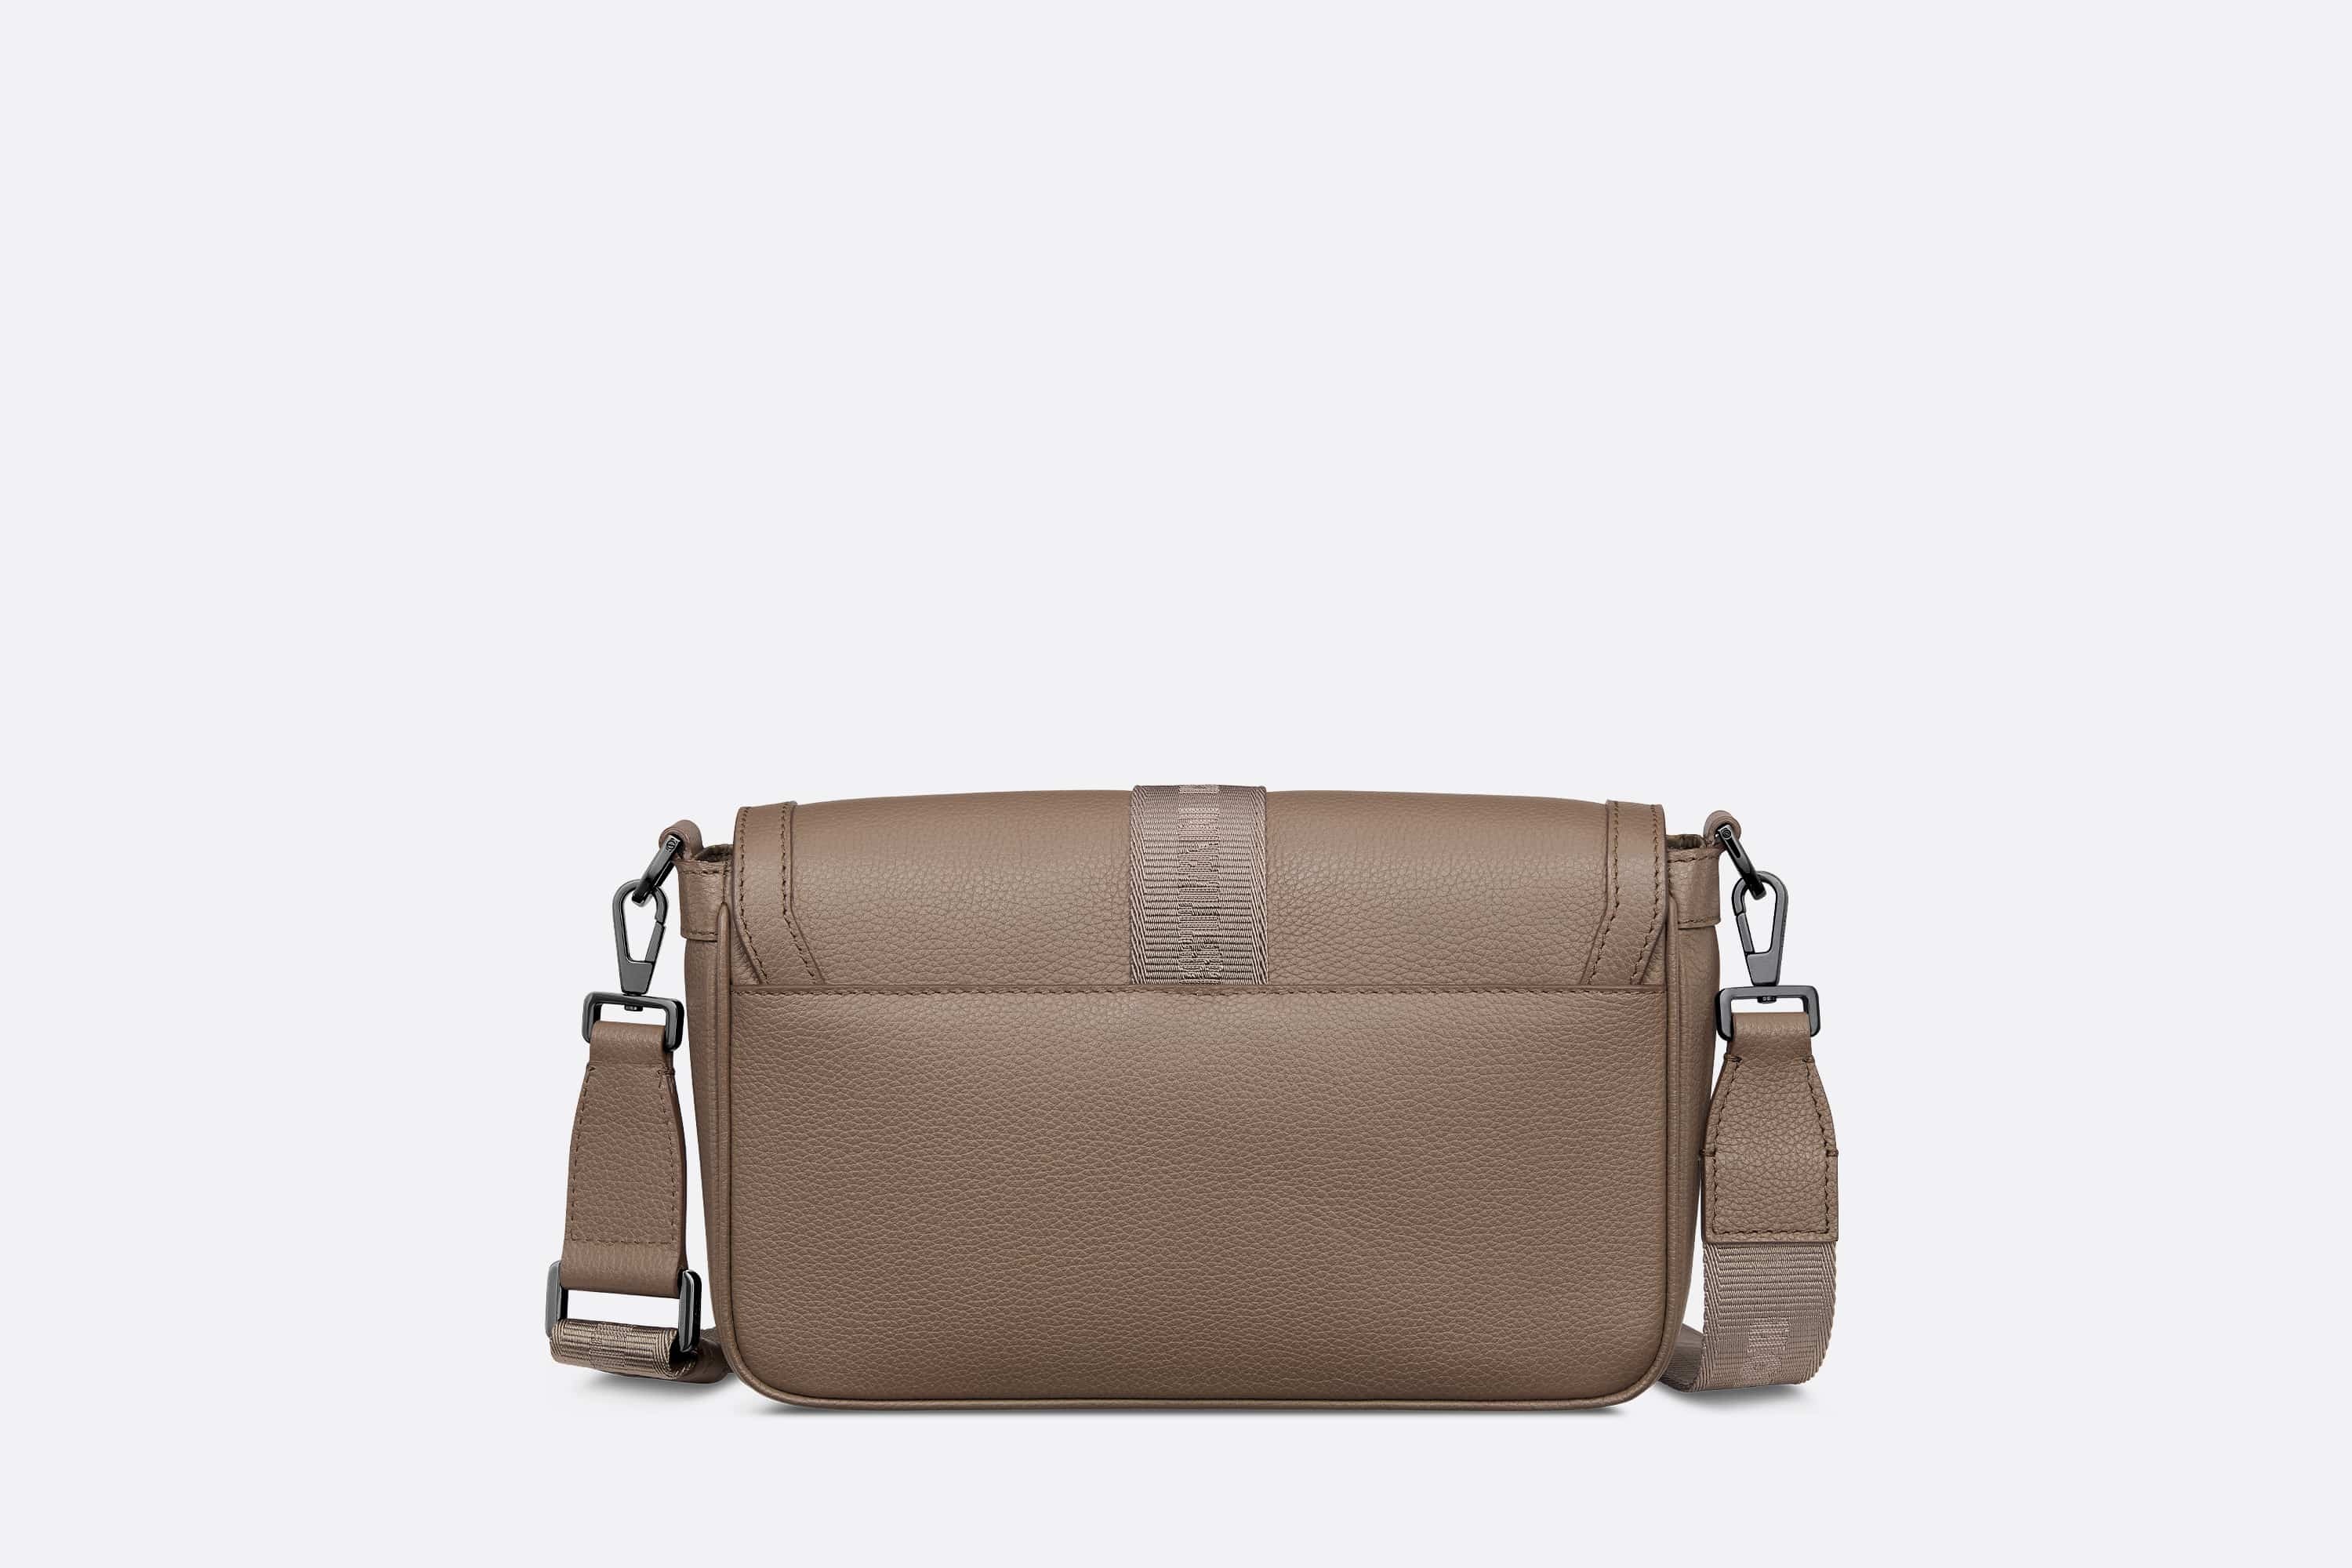 Dior Hit The Road Bag with Strap - 4